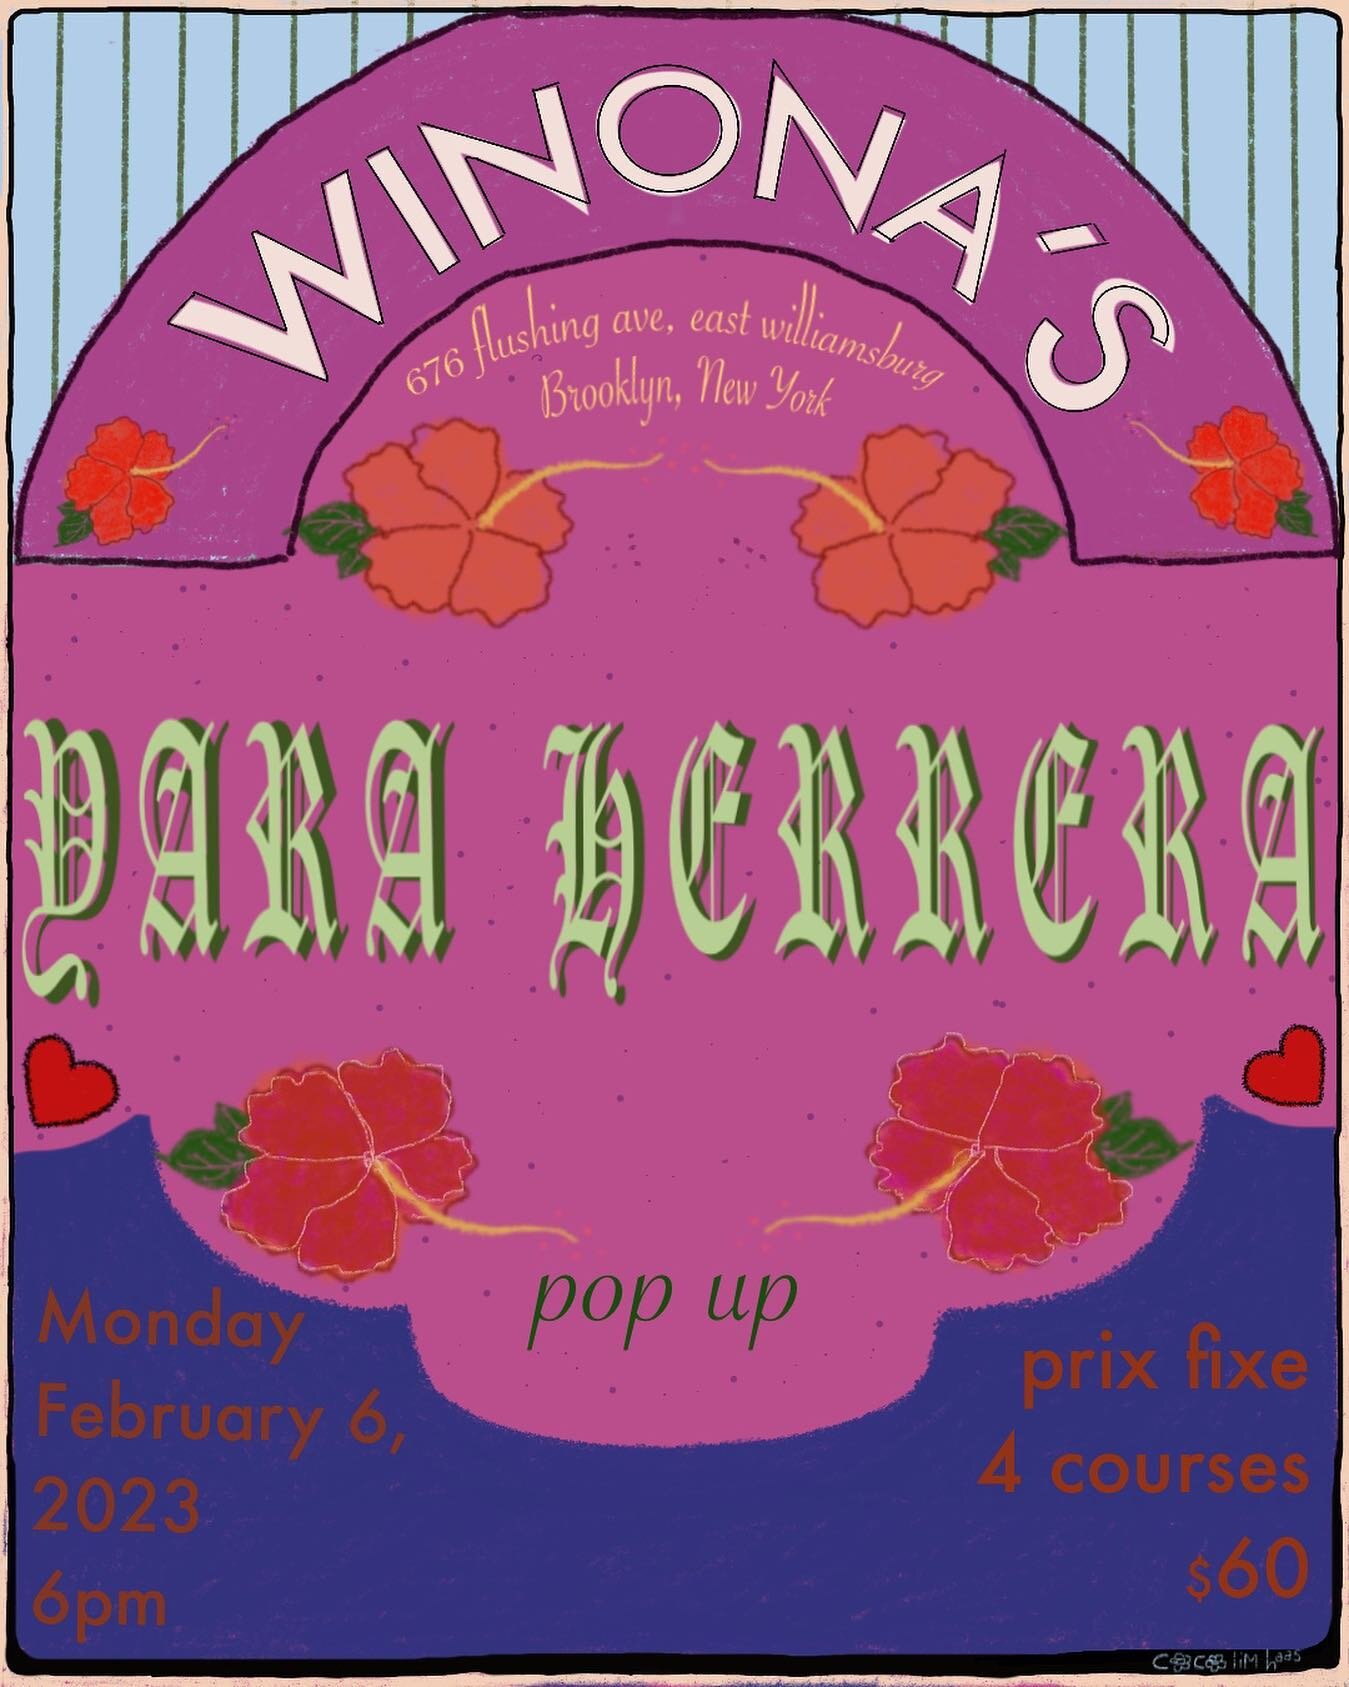 I made this flyer for @yaraherrerayara &lsquo;s pop up at @winonasbk 💎 
4 courses / 💲60. LFG affordable vibes !!! 
Reservations open on resy 🌺